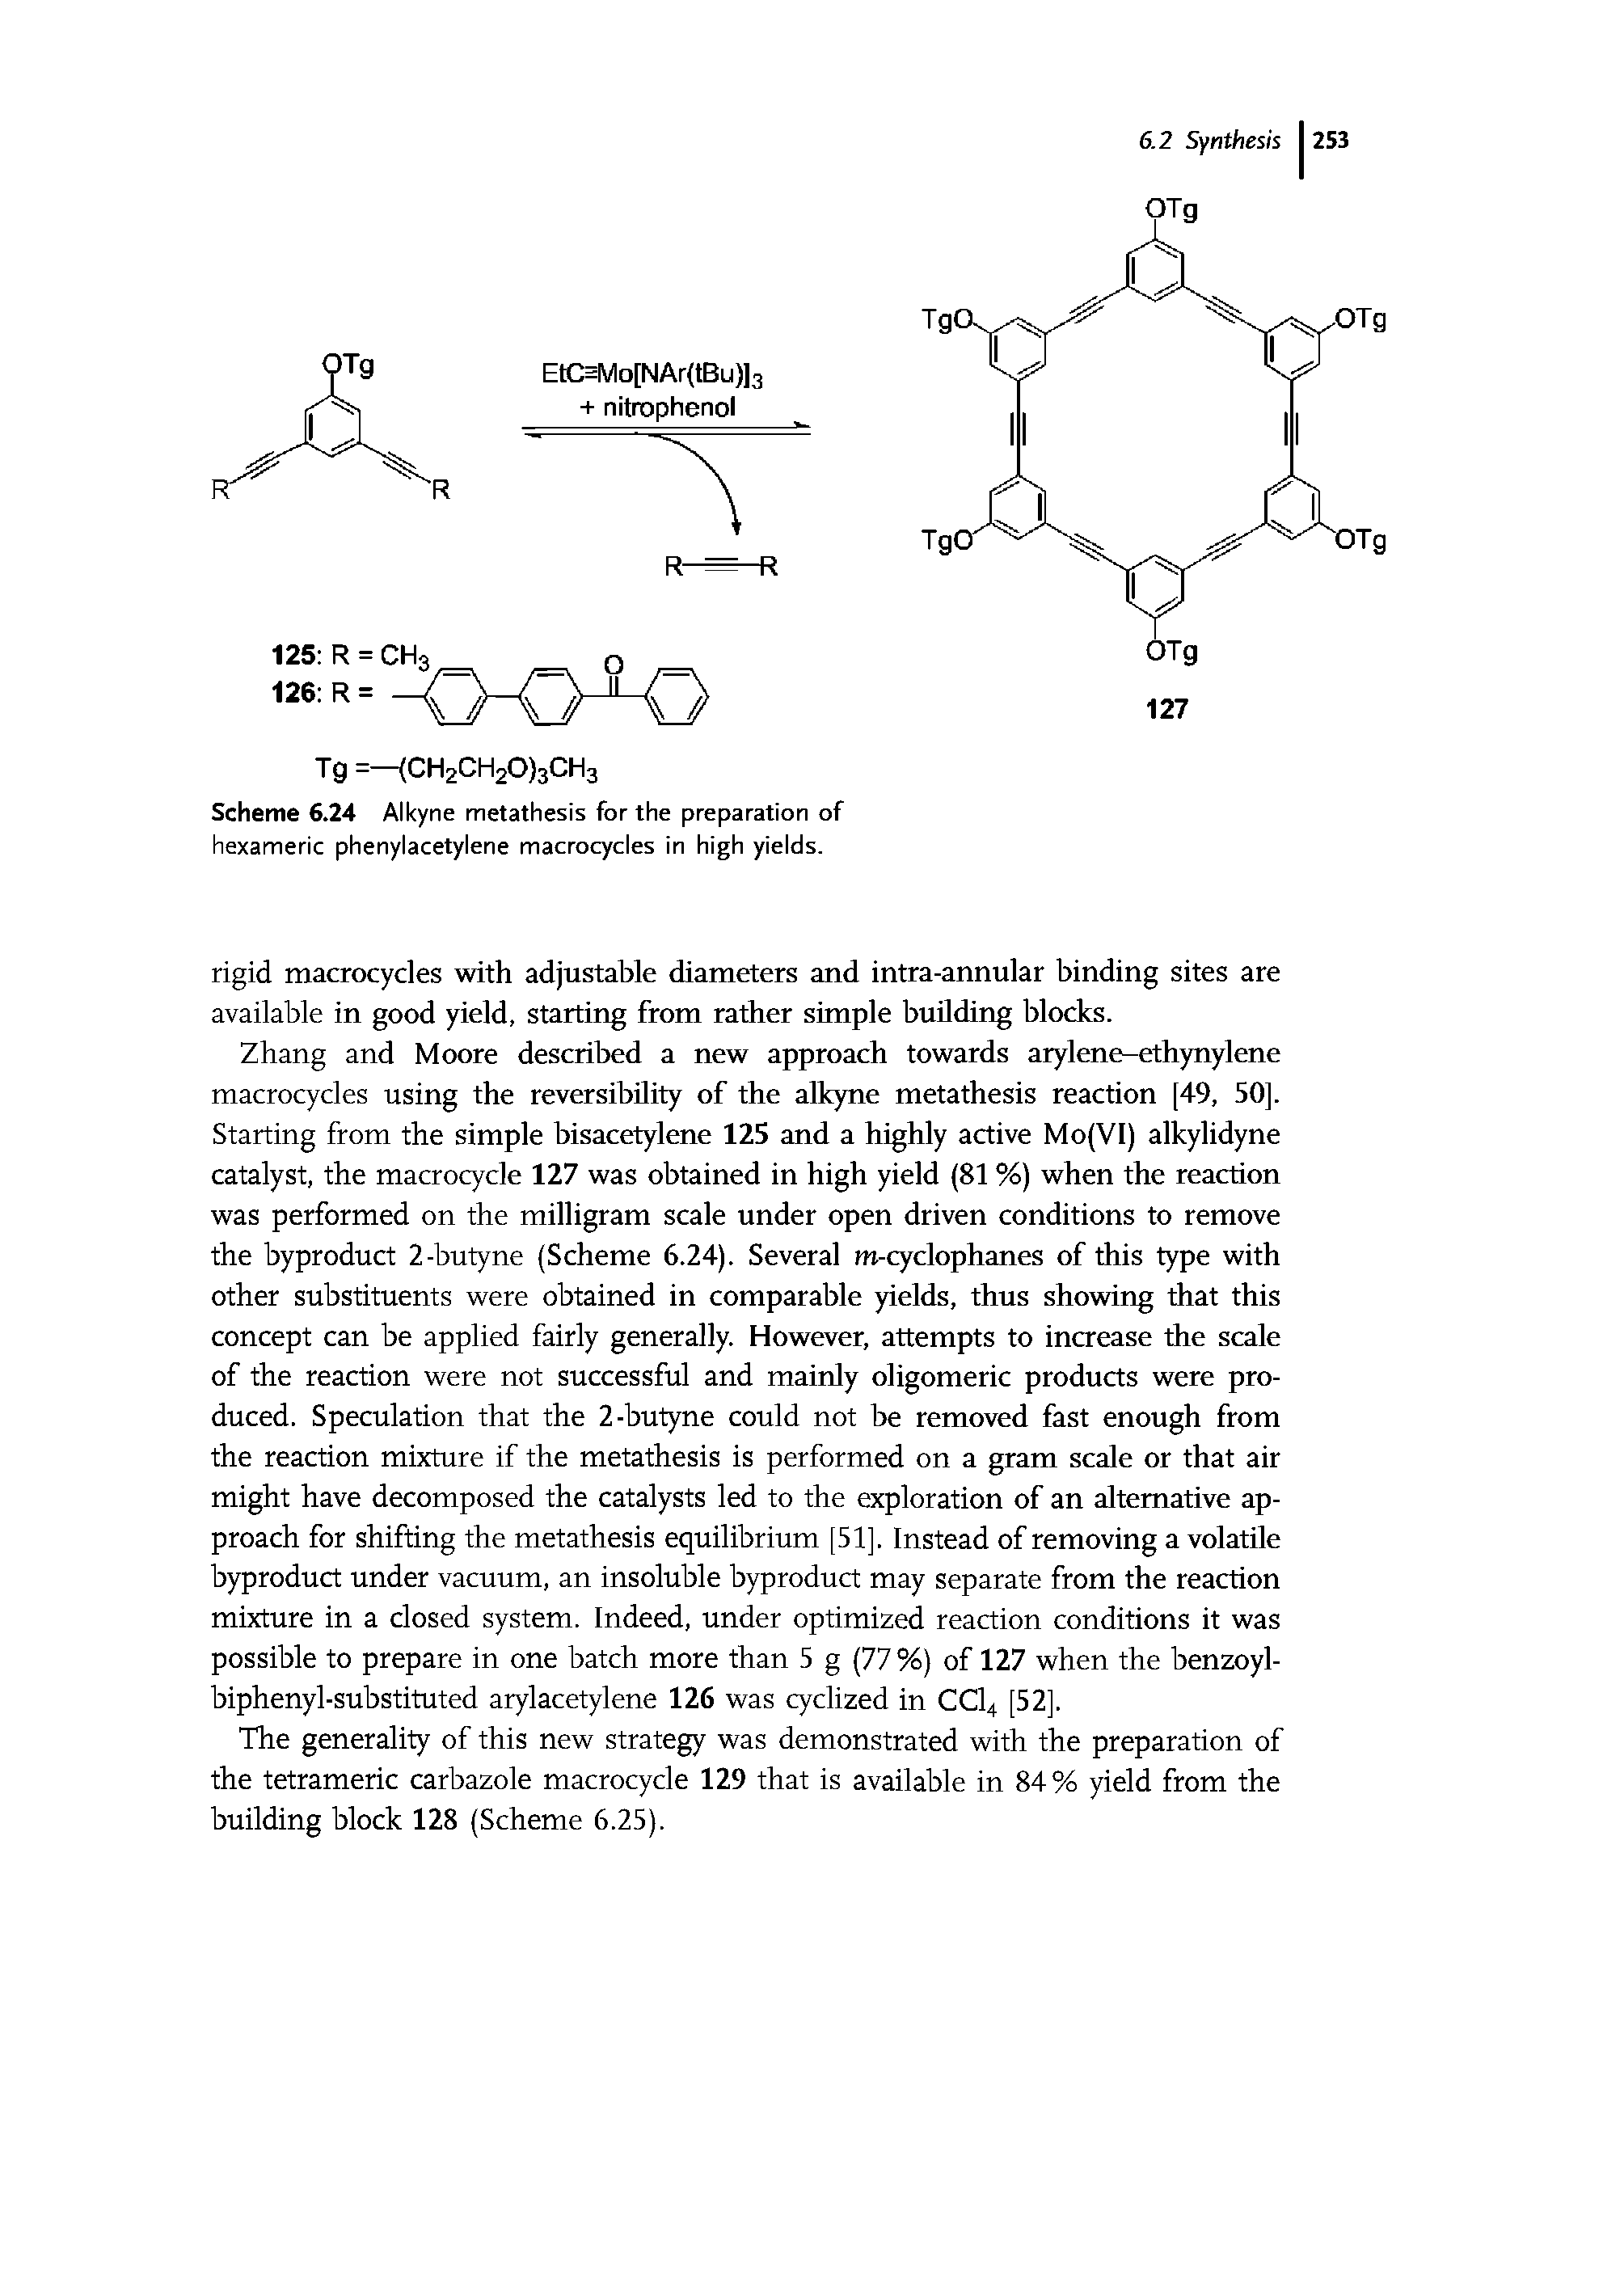 Scheme 6.24 Alkyne metathesis for the preparation of hexameric phenylacetylene macrocycles in high yields.